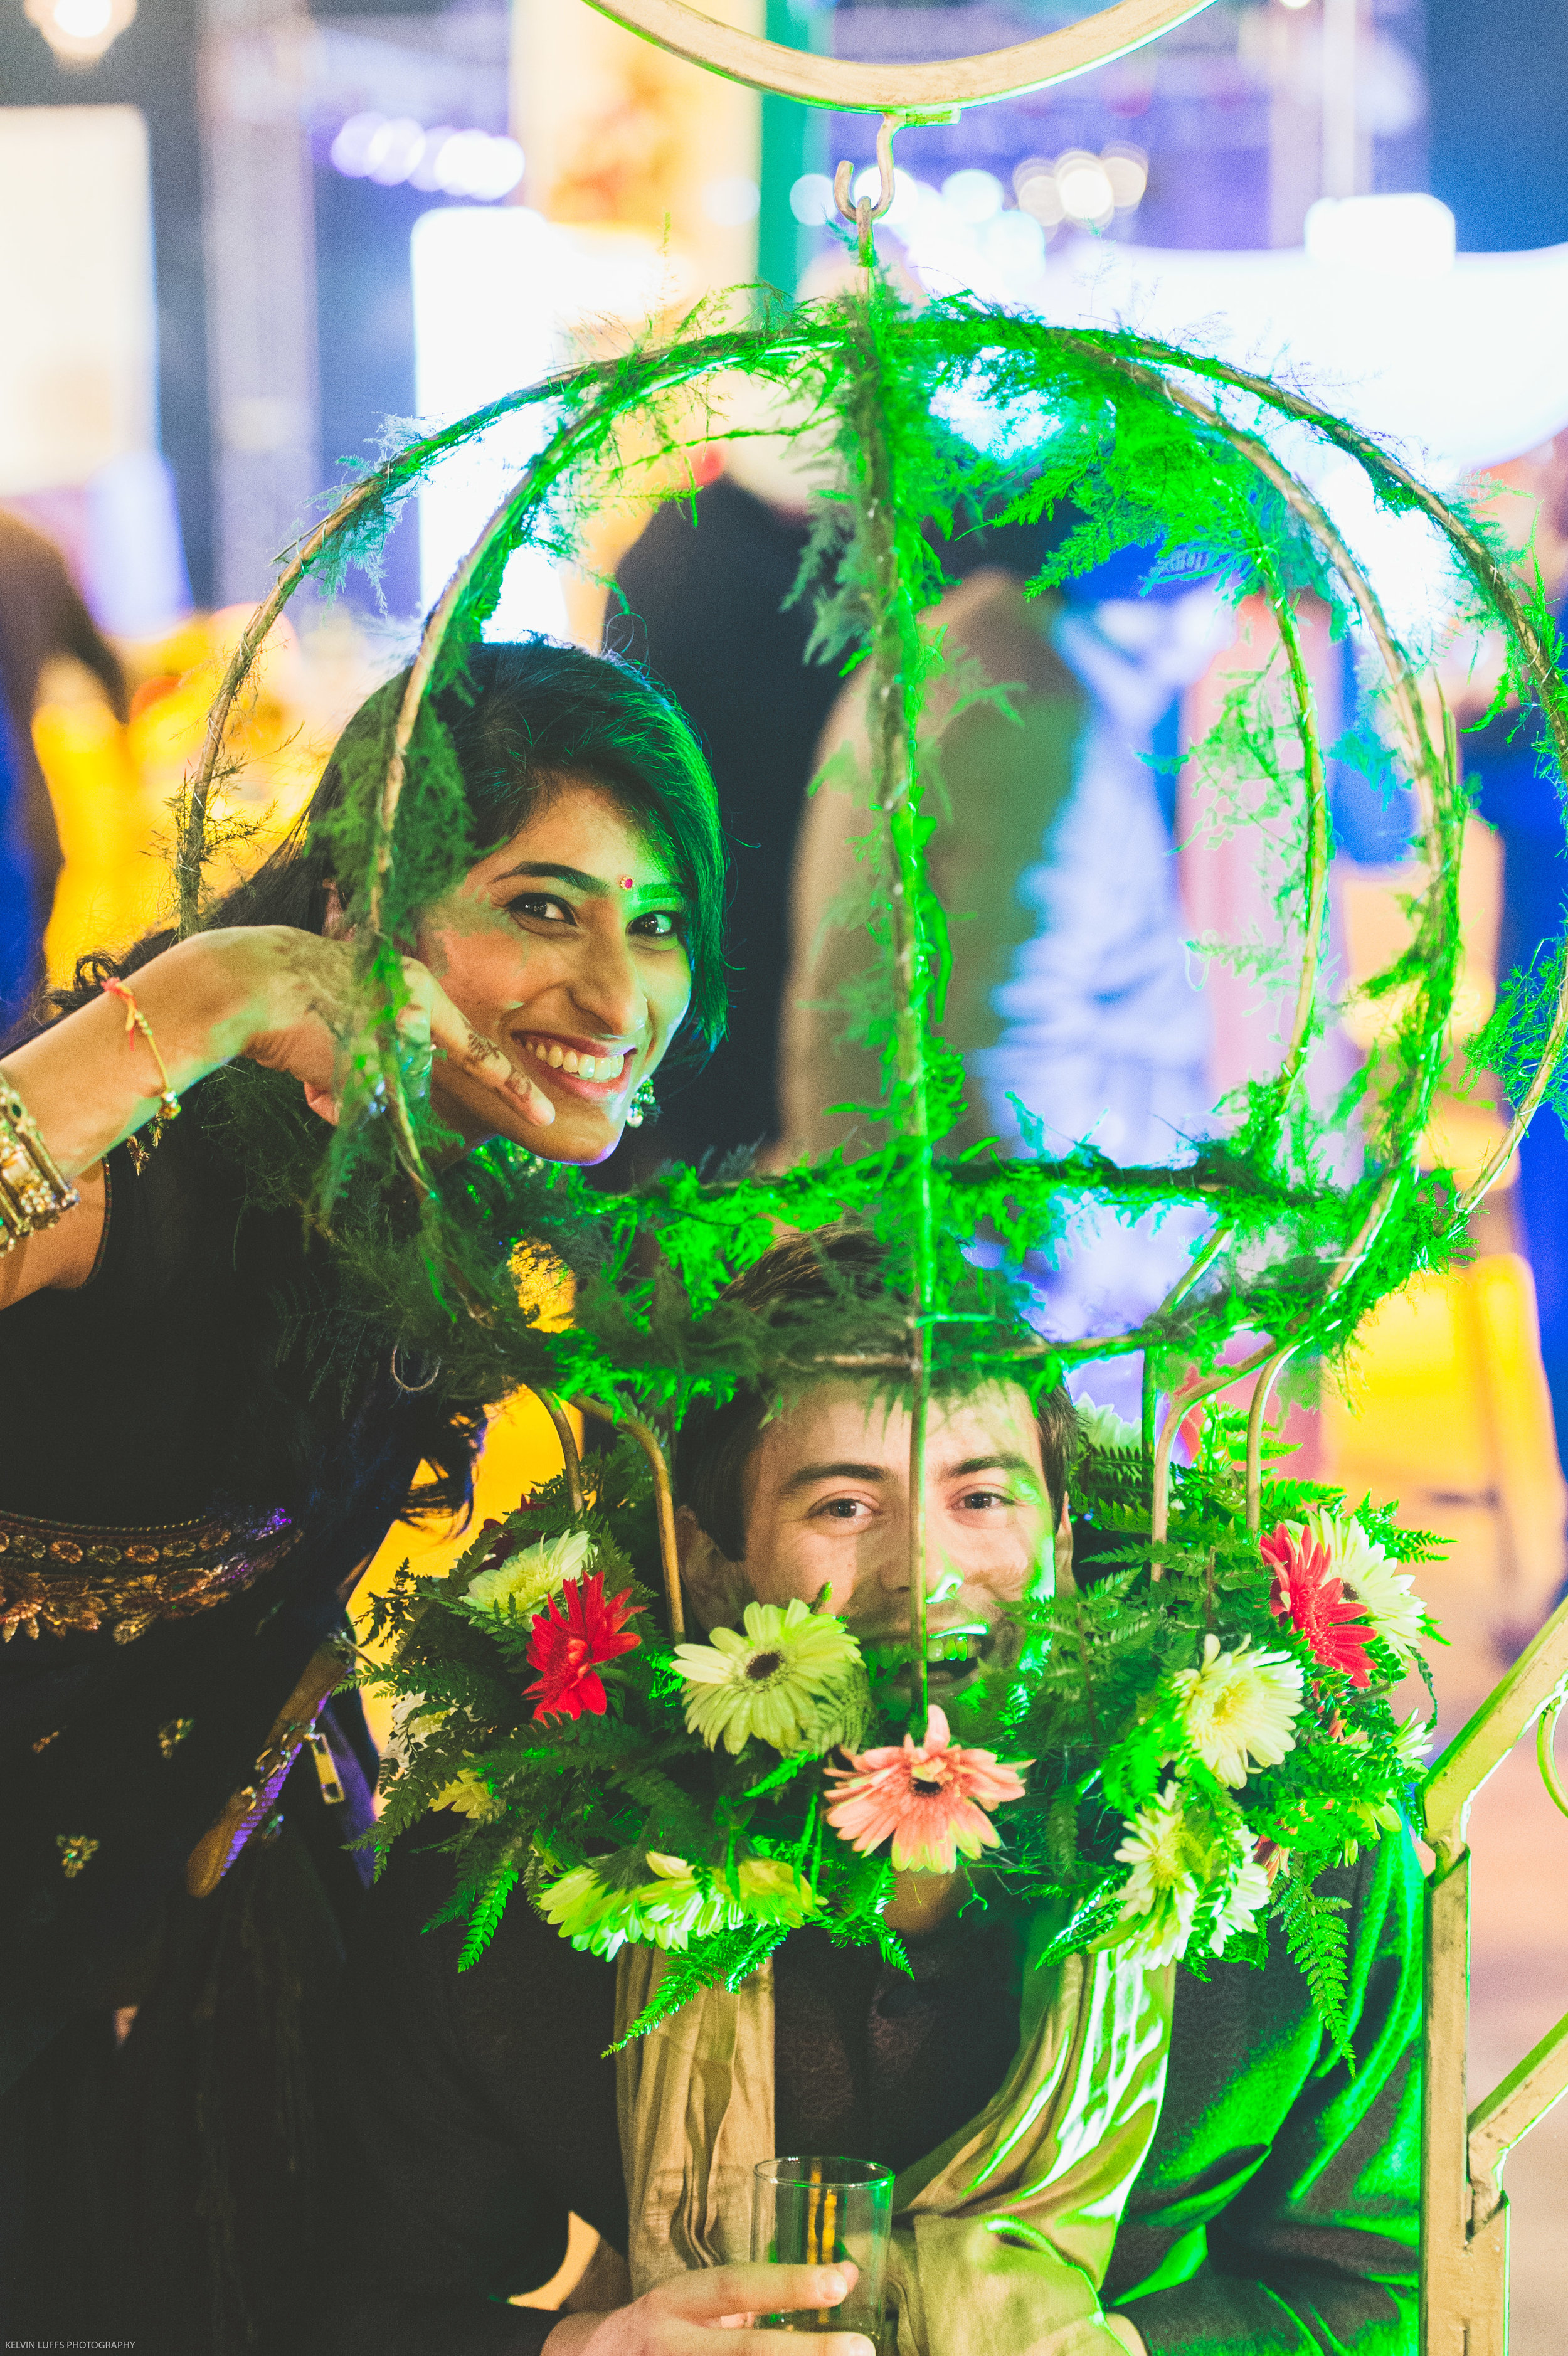  Shalini and Trent goofing around with the decoration. It's actually quite the LOL moment. 